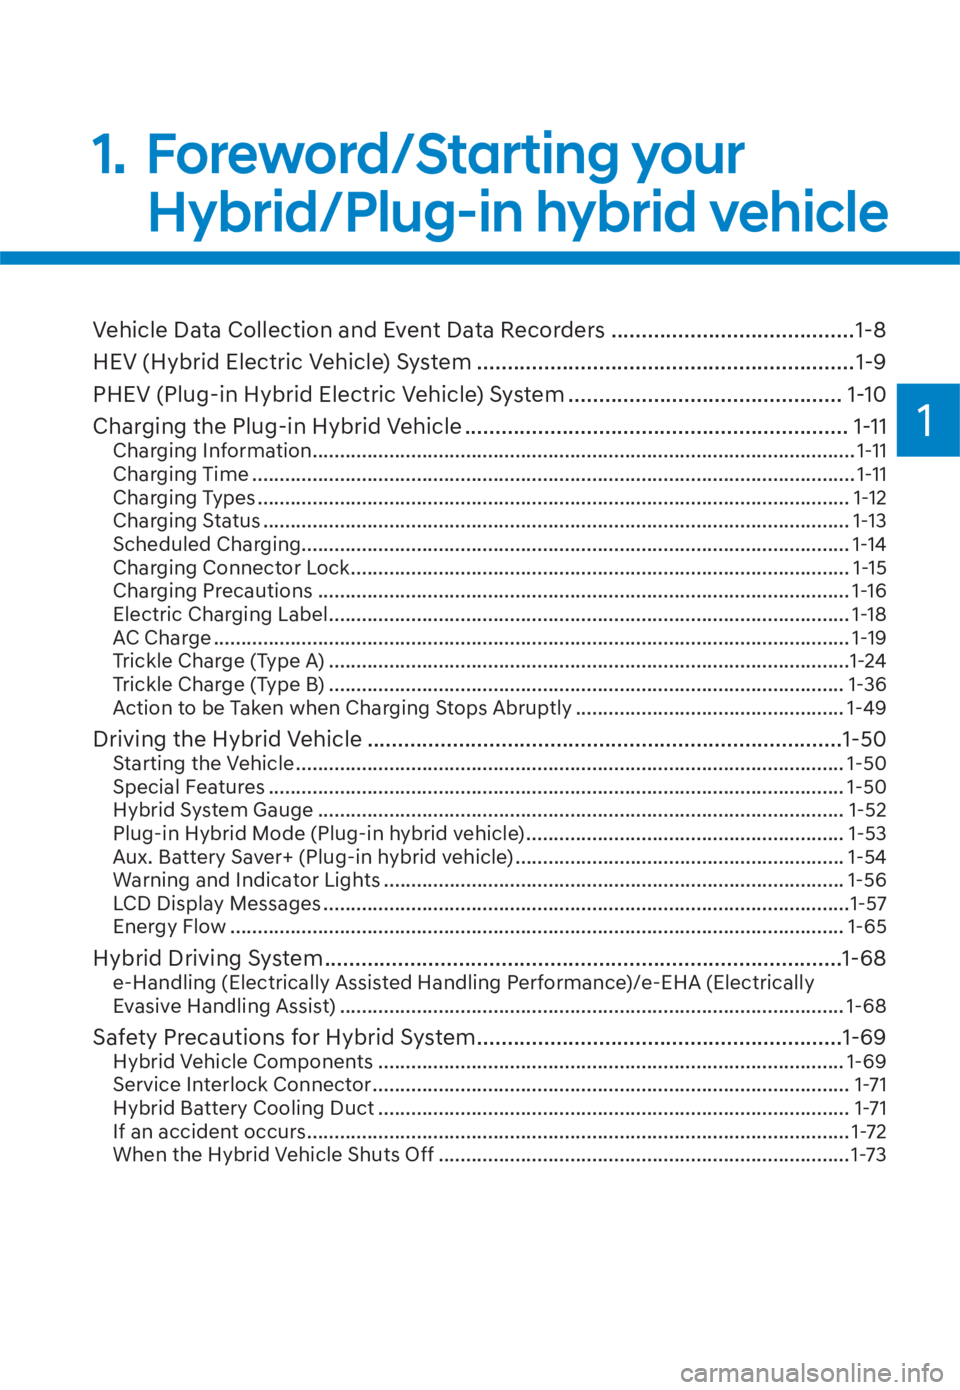 HYUNDAI TUCSON HYBRID 2023  Owners Manual 1
Vehicle Data Collection and Event Data Recorders ........................................ 1-8
HEV (Hybrid Electric Vehicle) System .............................................................. 1-9
